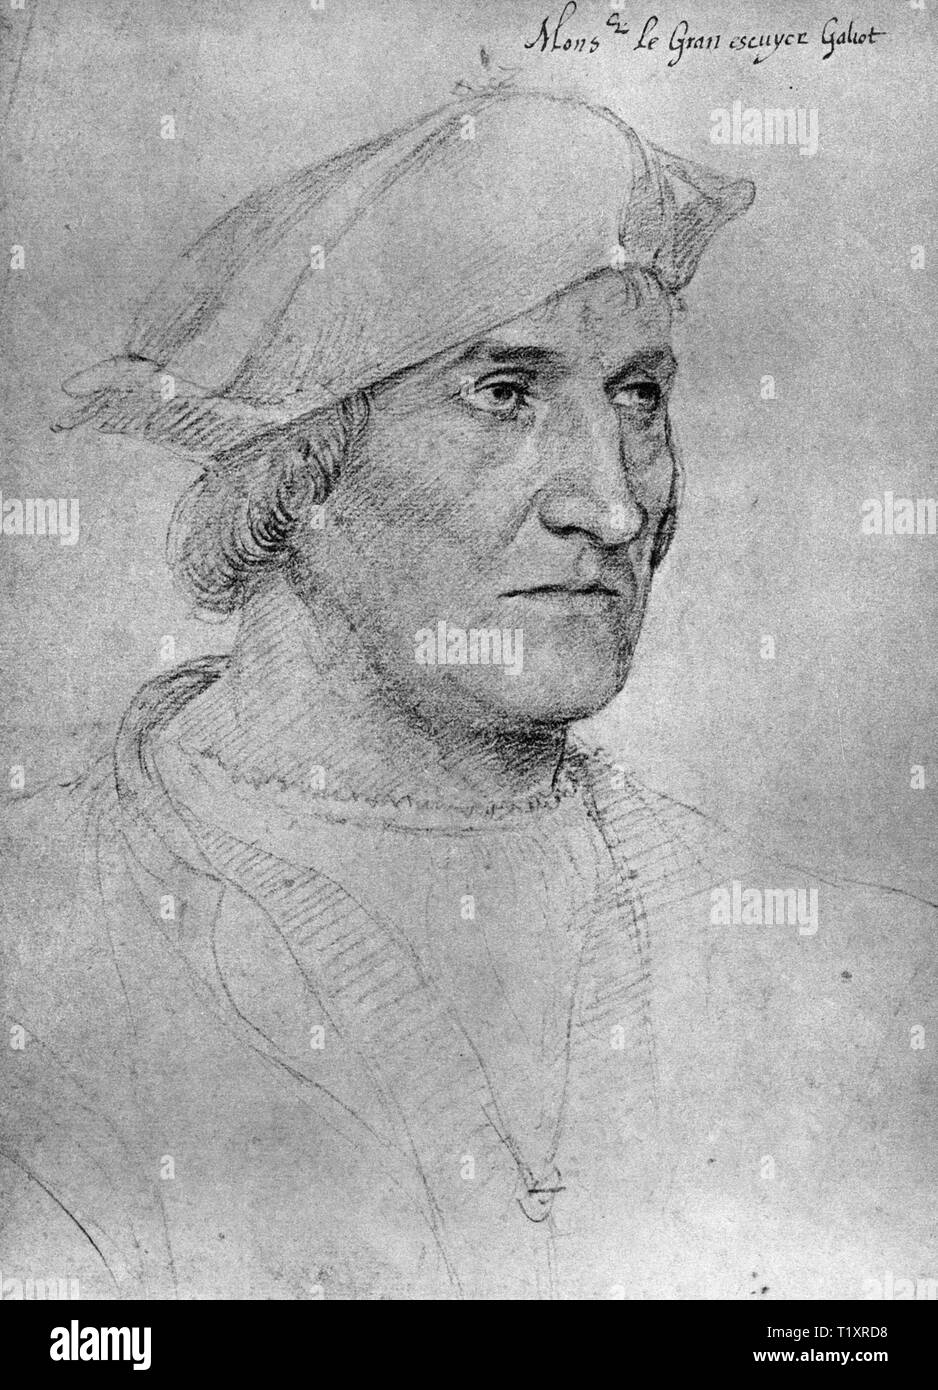 fine arts, Jean Clouet (1480 - 1541), drawing, Galiot de Genouillac, Grand Squire of France, 'Monsieur Le Gran escuyer Galiot', portrait, early 16th century, Additional-Rights-Clearance-Info-Not-Available Stock Photo